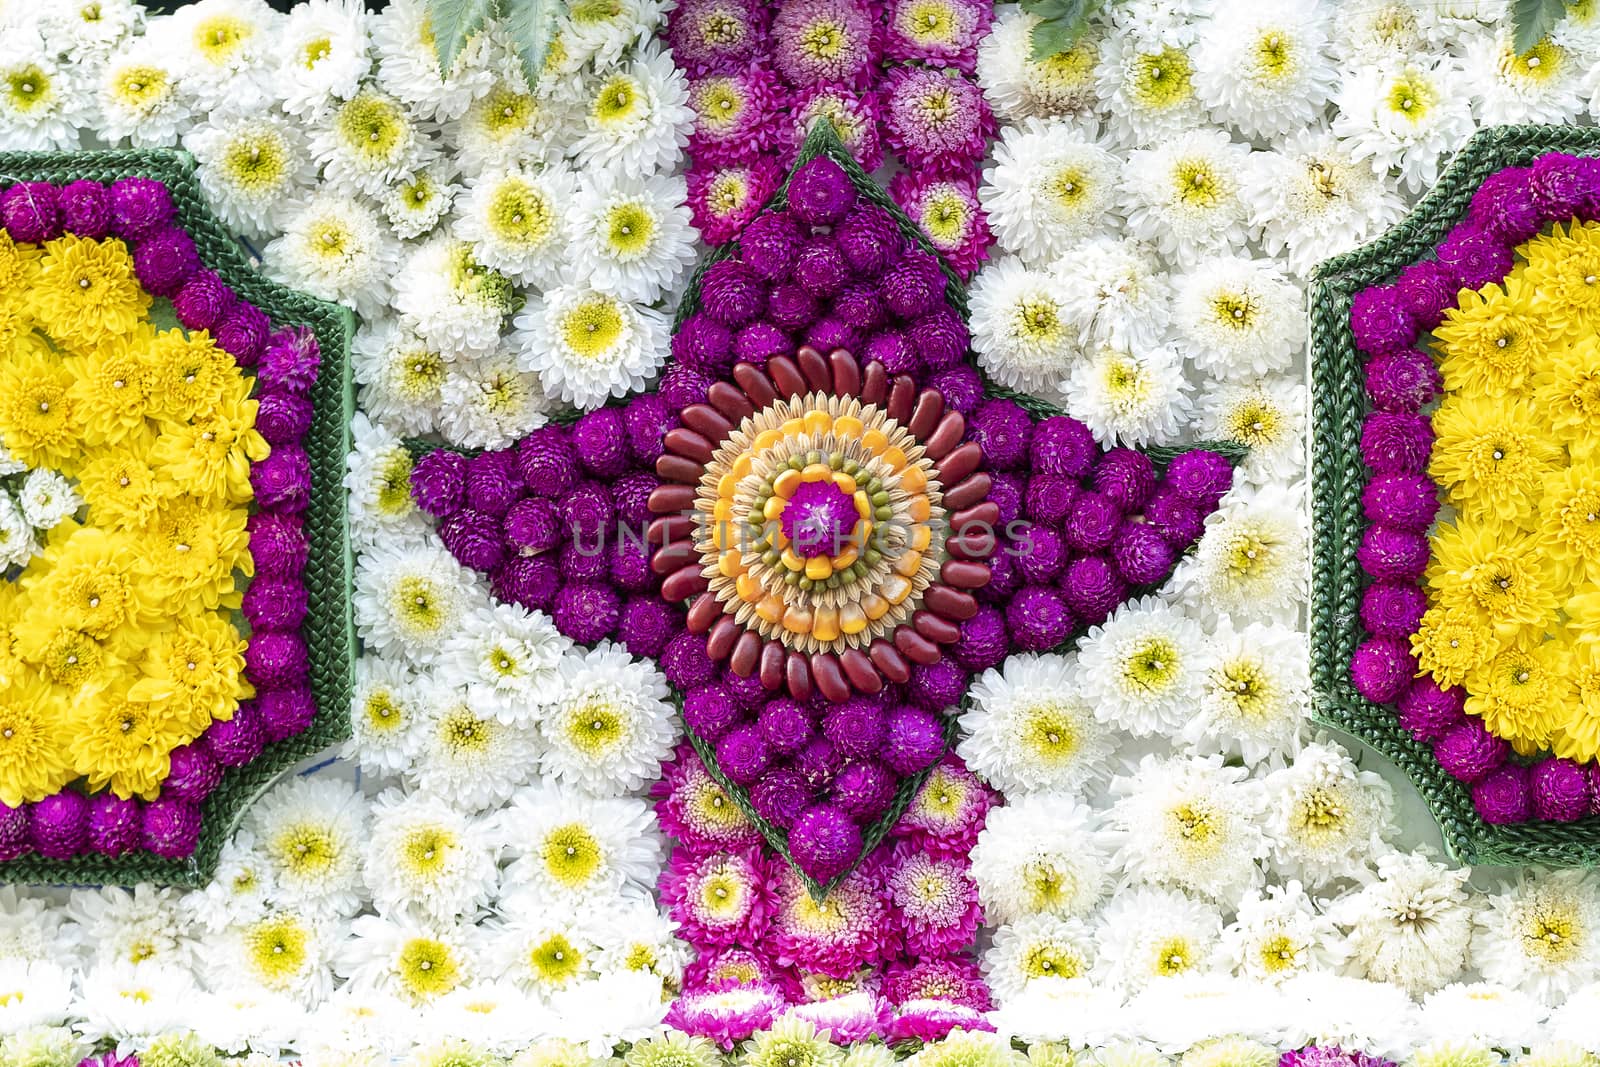 intricate patterns using flowers and seeds by Nawoot